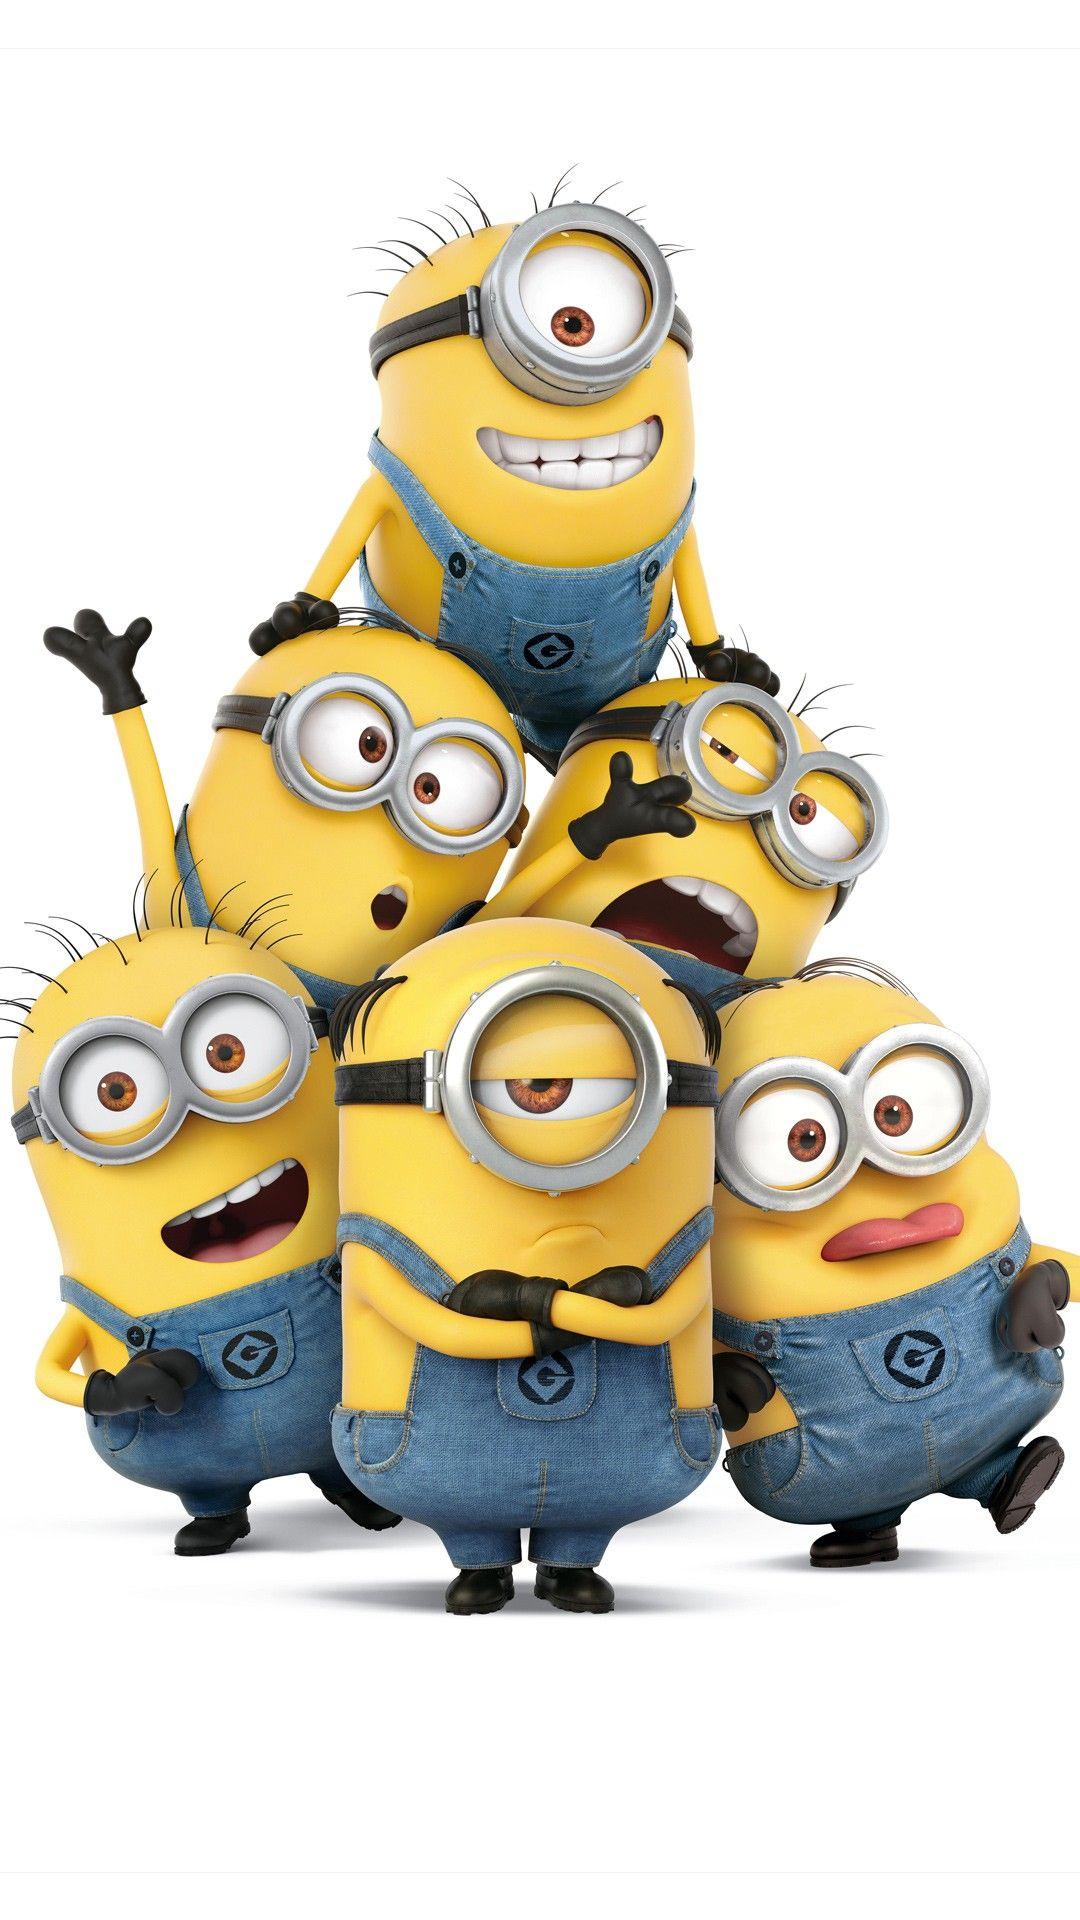 despicable me minion iphone wallpapers top free despicable me minion iphone backgrounds wallpaperaccess despicable me minion iphone wallpapers